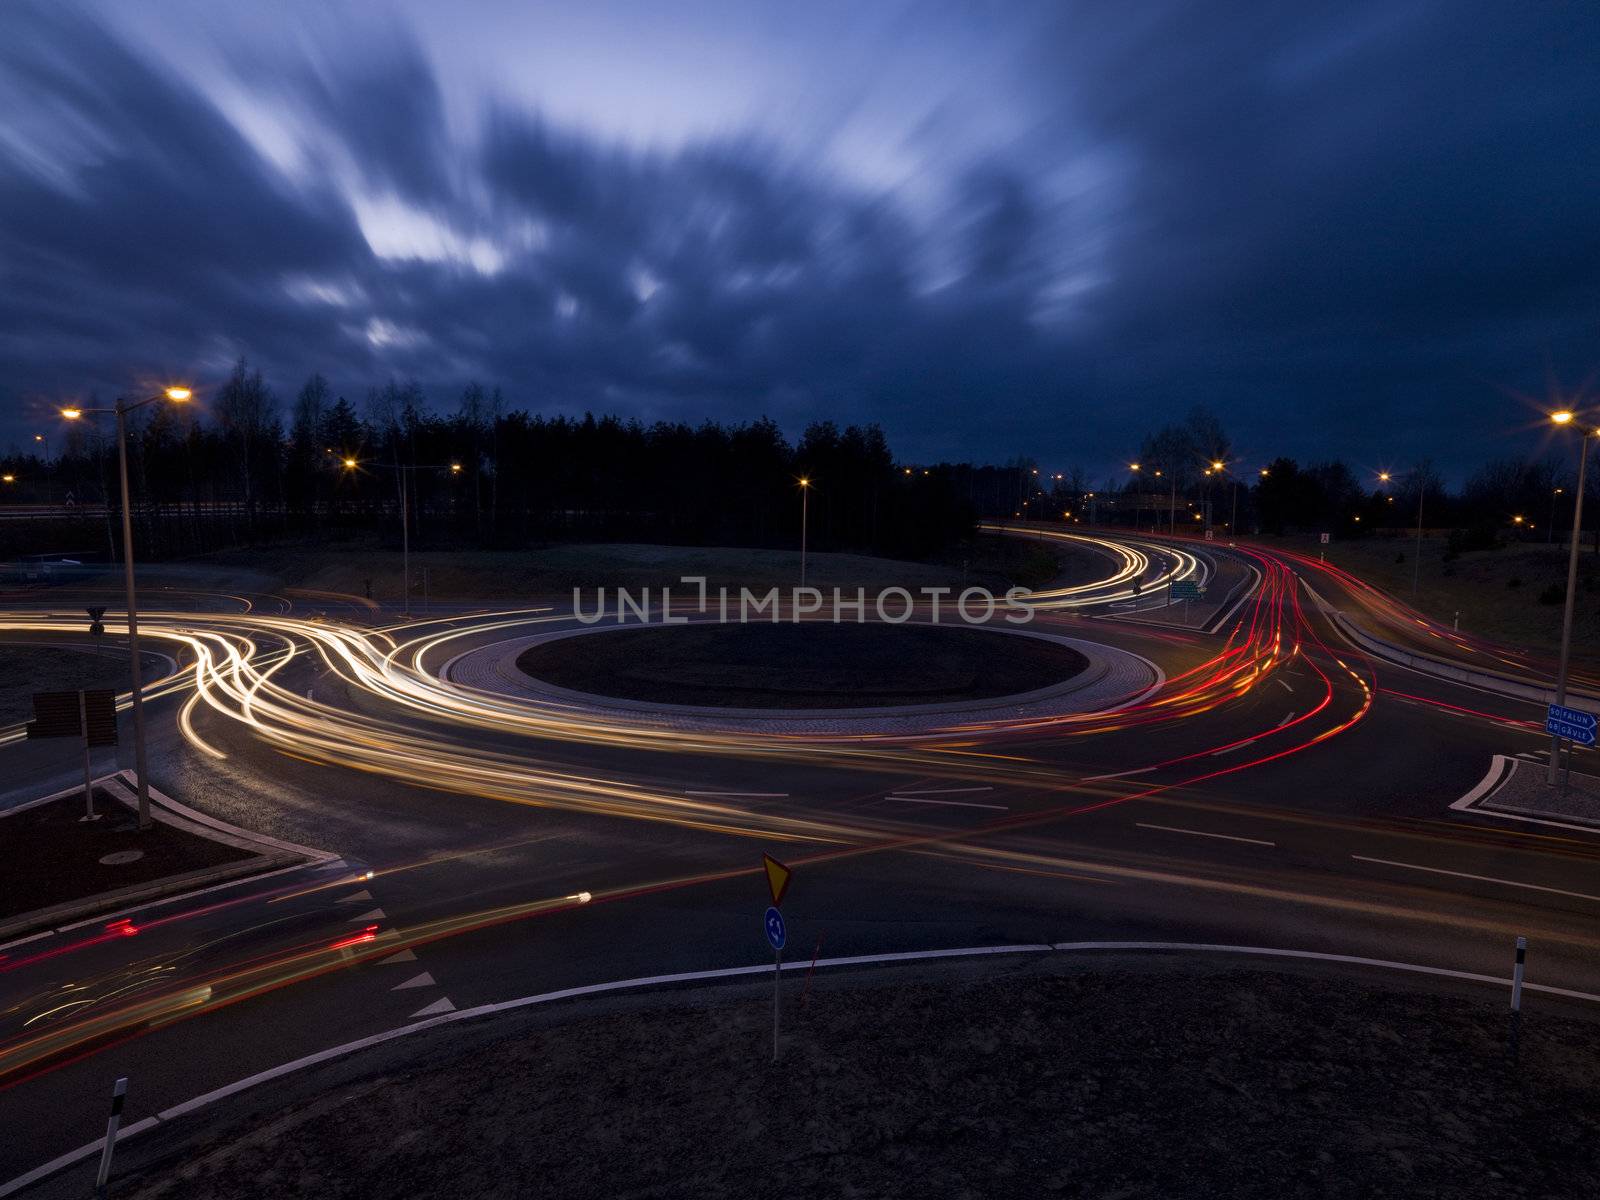 Traffic roundabout shot with long exposure time at night time